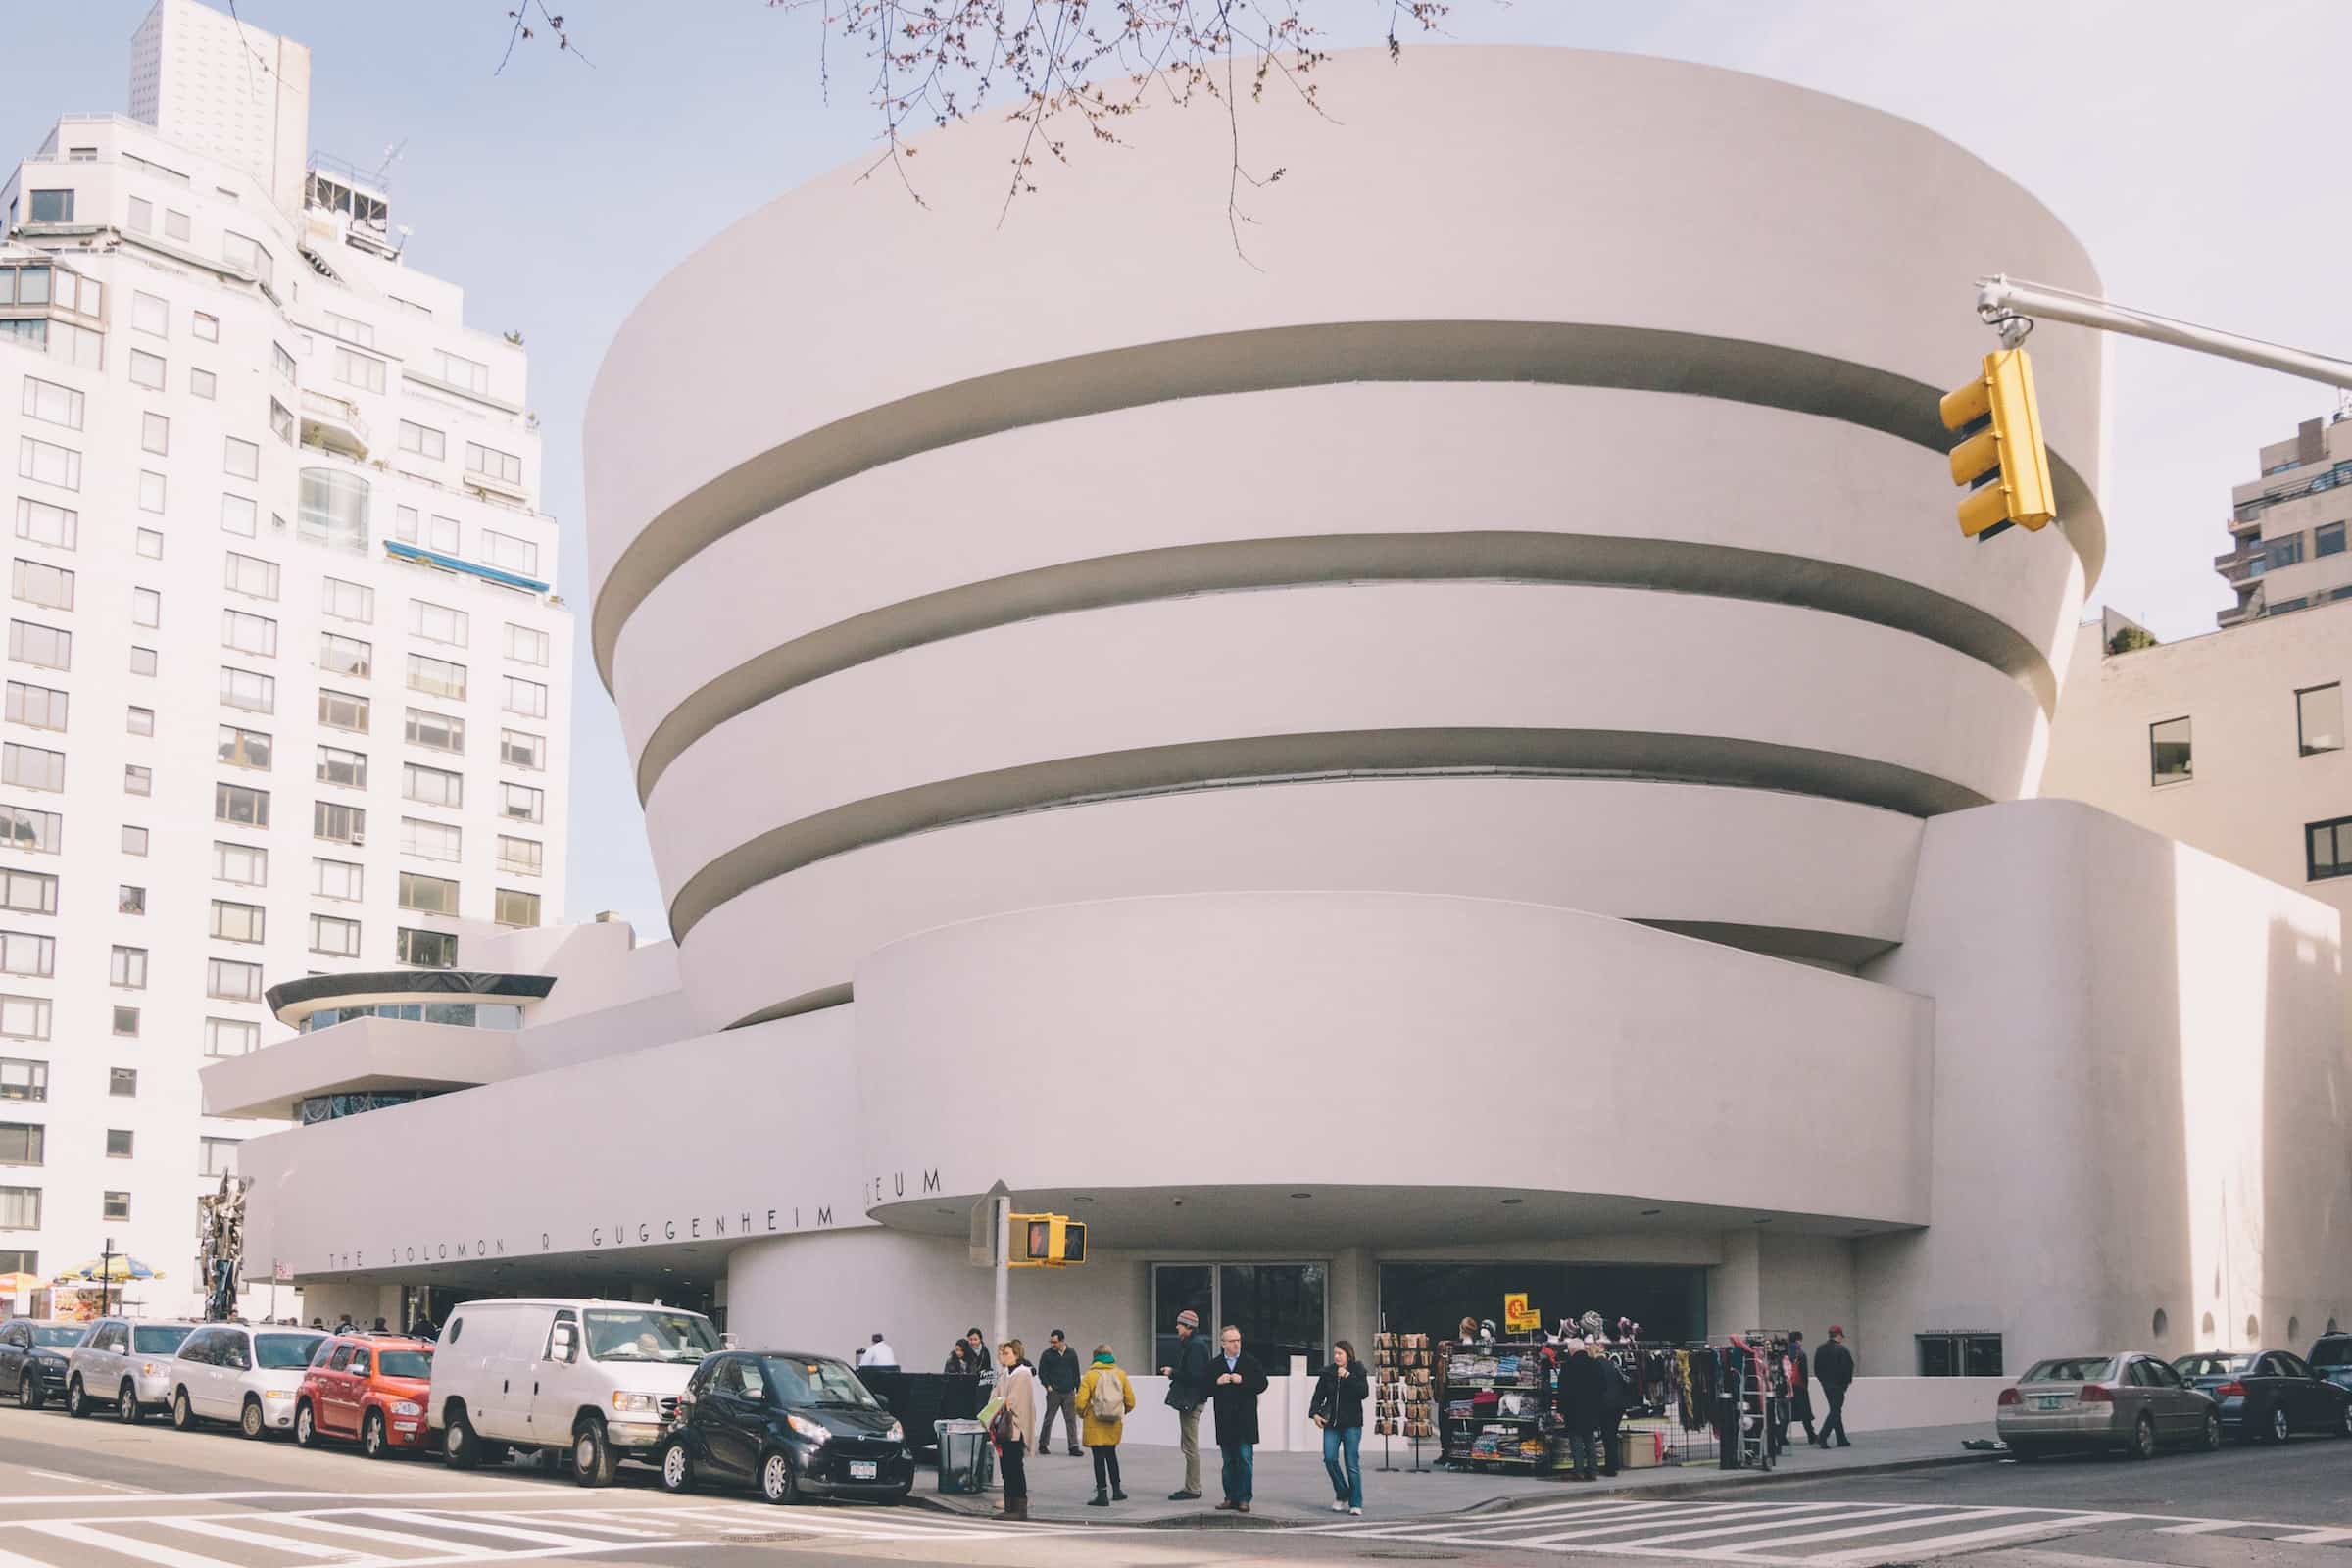 The Guggenheim Museum is accused of wrongfully possessing a Picasso painting valued at up to $200 million